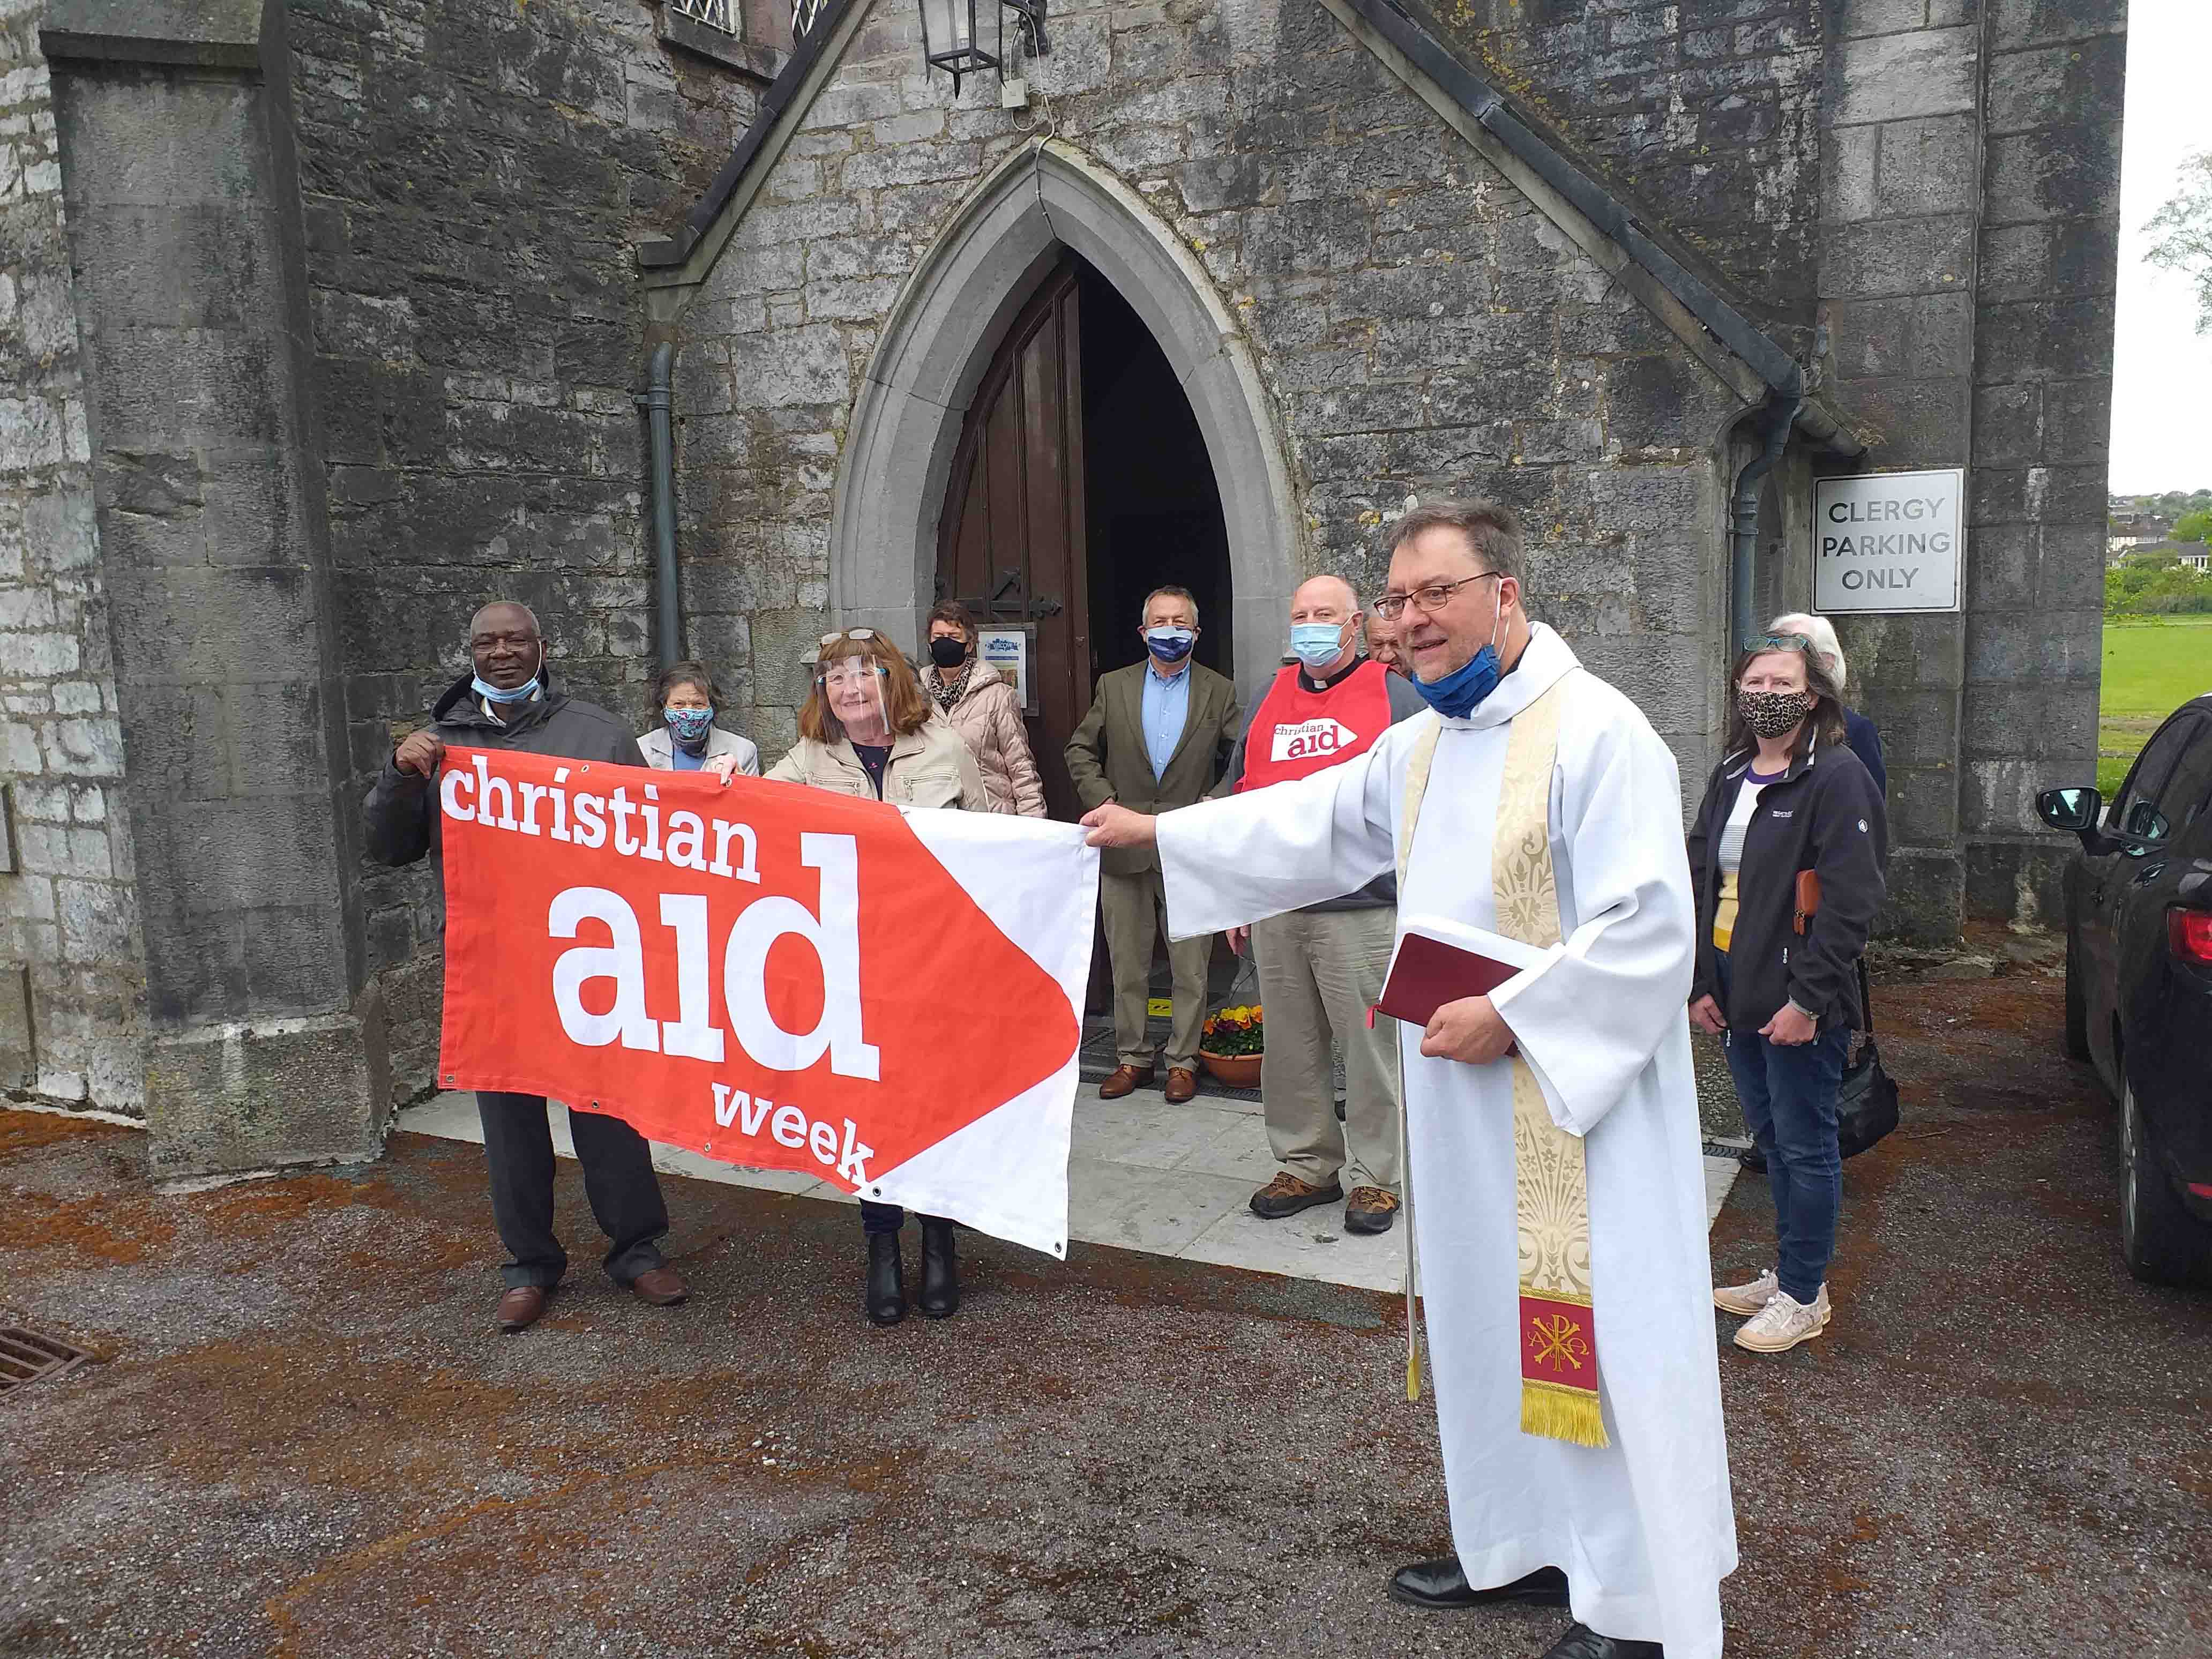 The Reverend Meurig Williams (right) with parishioners in Mallow Union of Parishes, and also with the Reverend Tony Murphy (in Christian Aid vest).